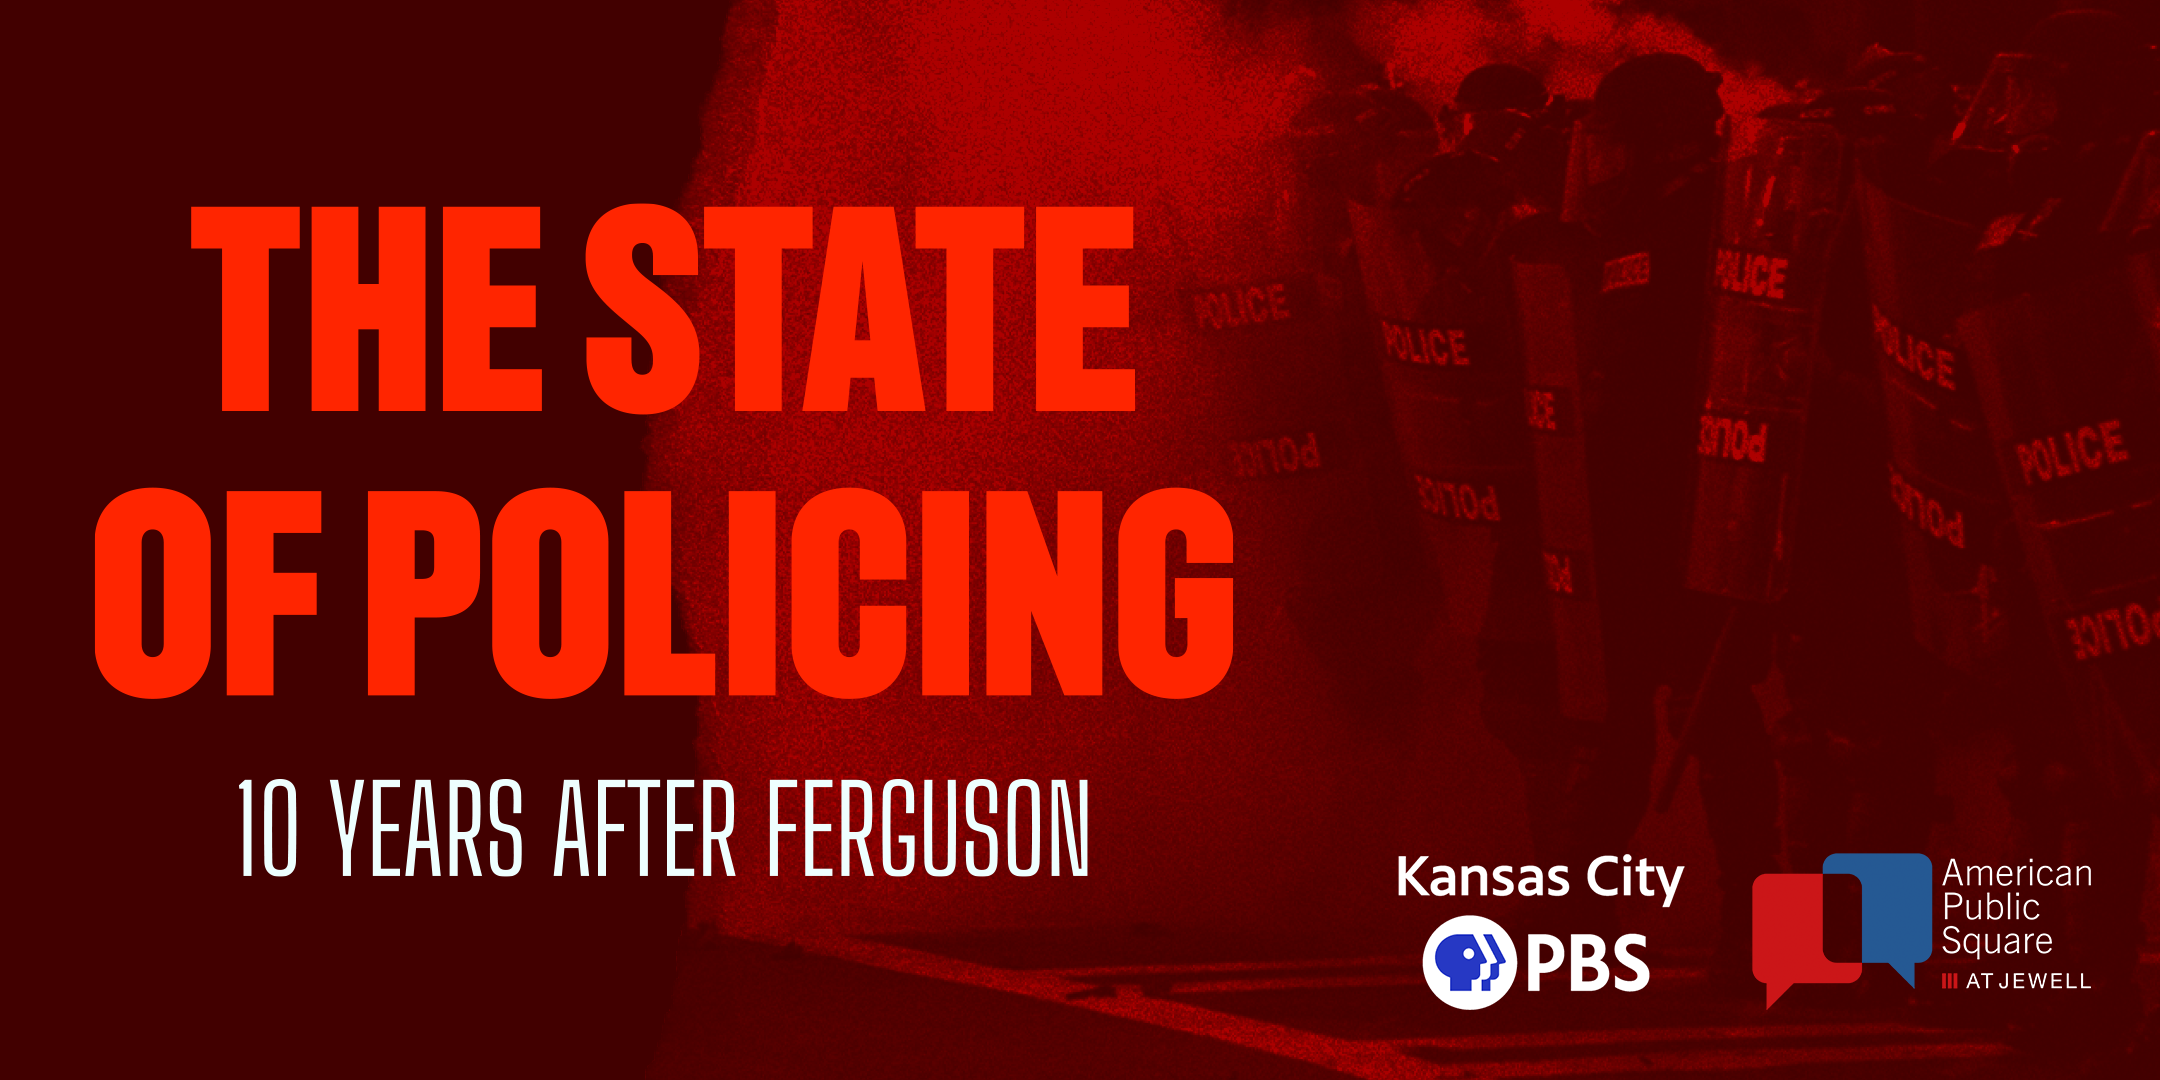 The State of Policing 10 Years After Ferguson Kansas City PBS and American Public Square at Jewell logos